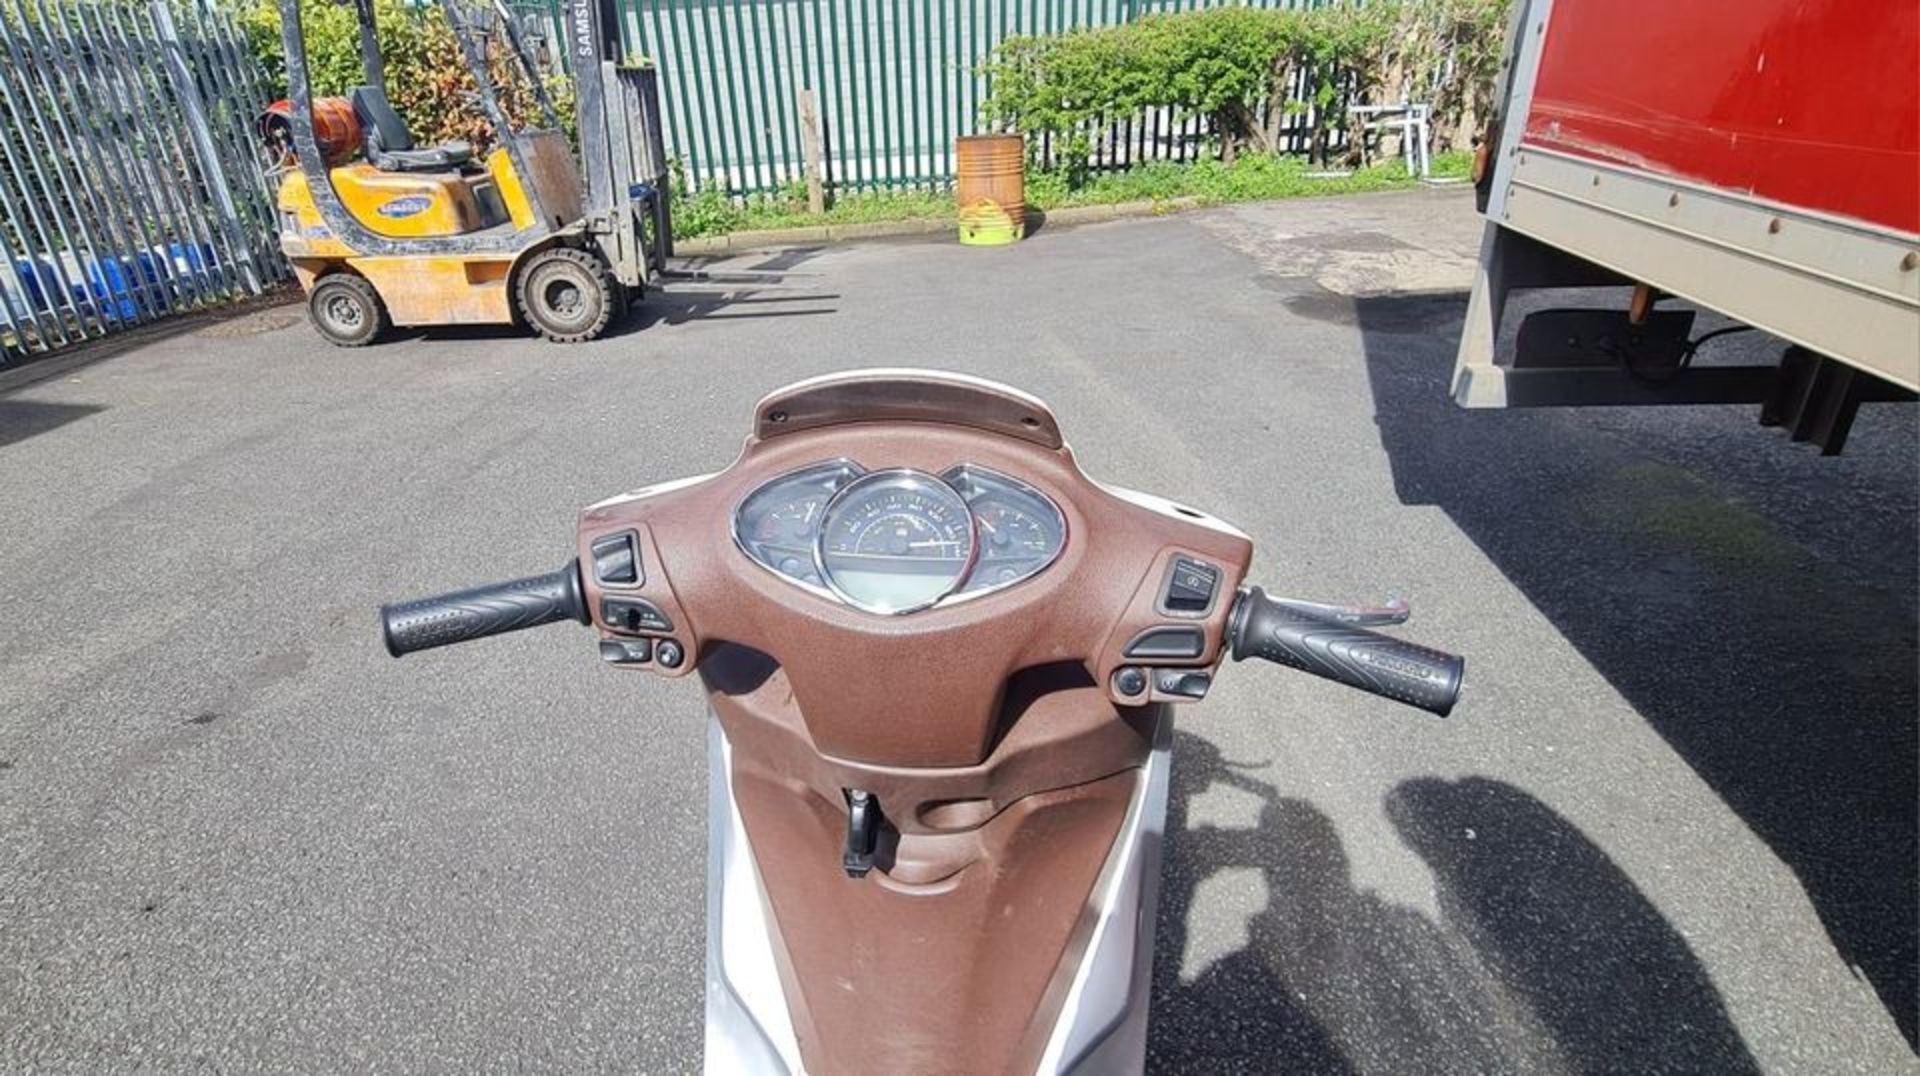 2016 Piaggio Medley 125 Scooter - Missing Key - Image 8 of 13